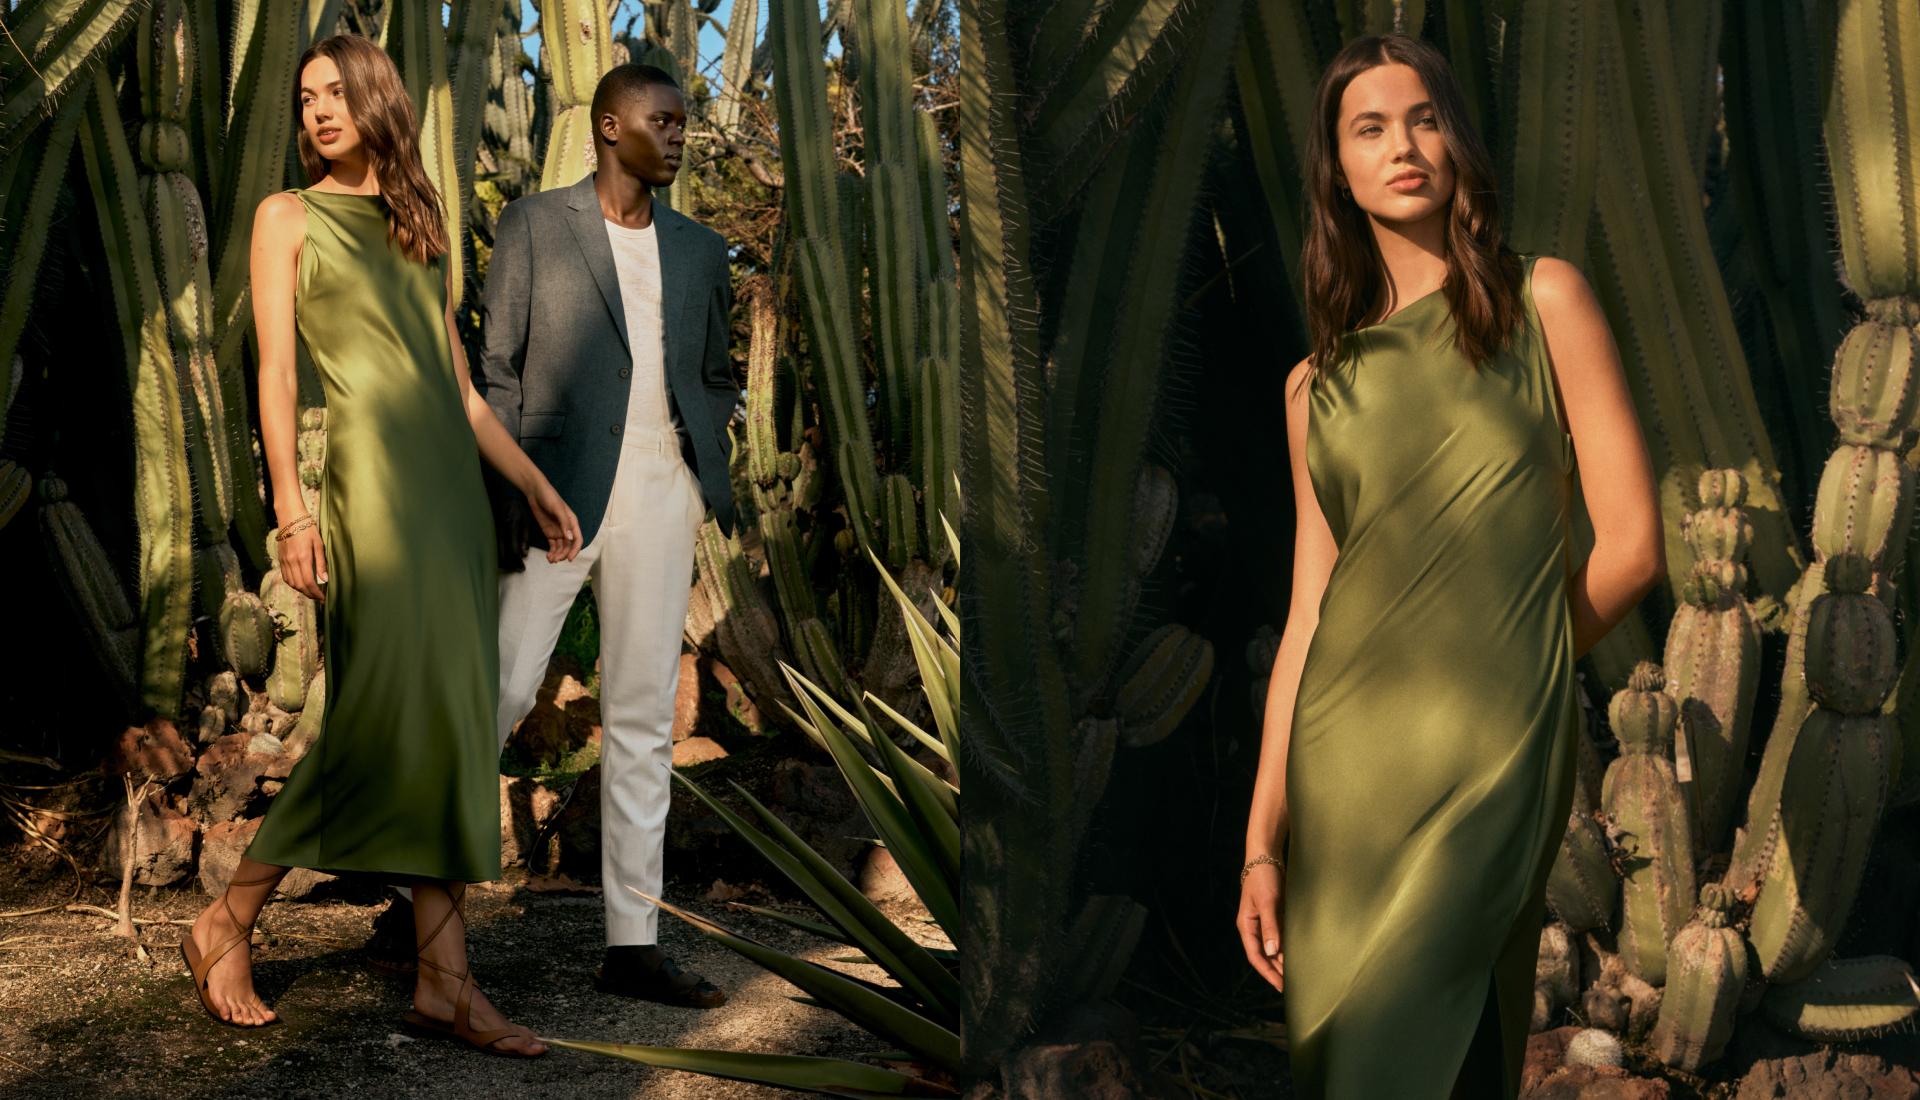 Sun-Soaked Celebrations. From outdoor weddings to high summer soirées, these styles were tailor-made for special occasions of all kinds. Shop Occasion